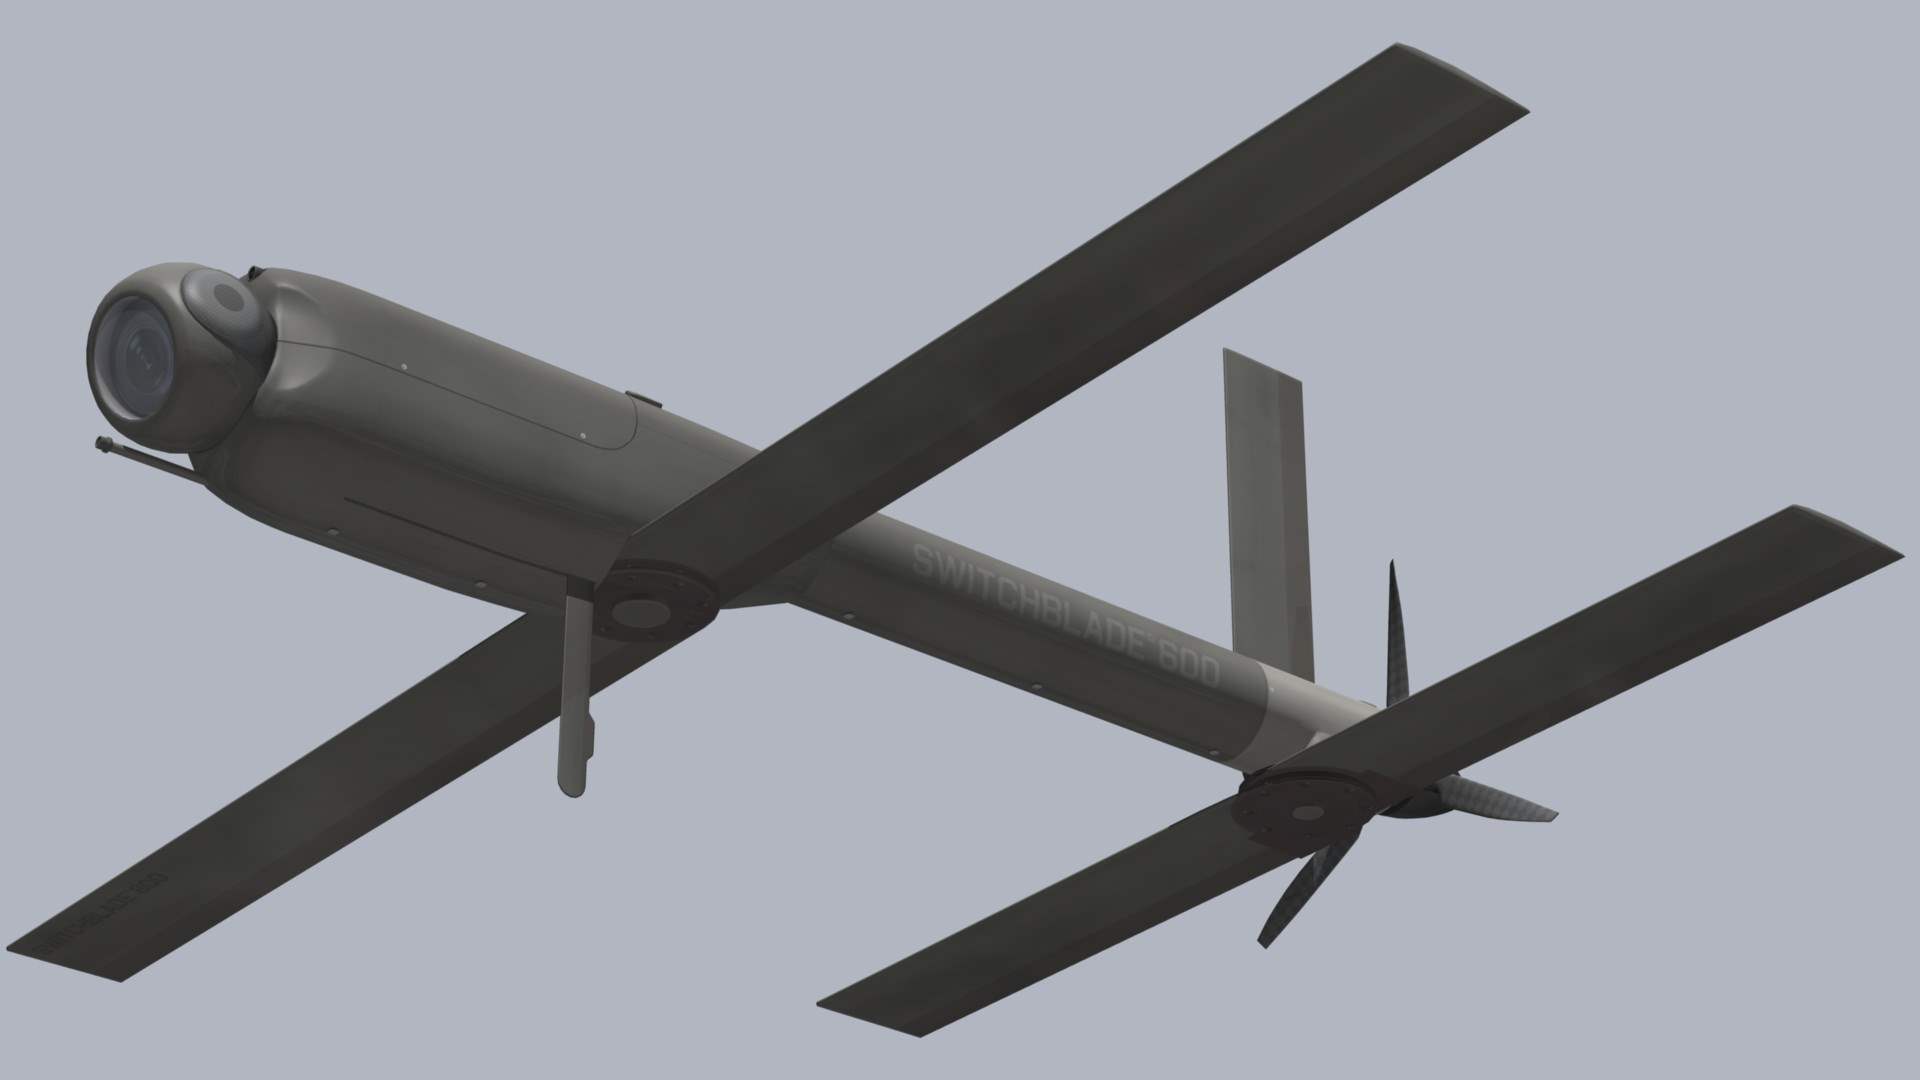 Israeli Broadcasting Authority: Israel requests purchase of 200 suicide drones, Switchblade 600 model